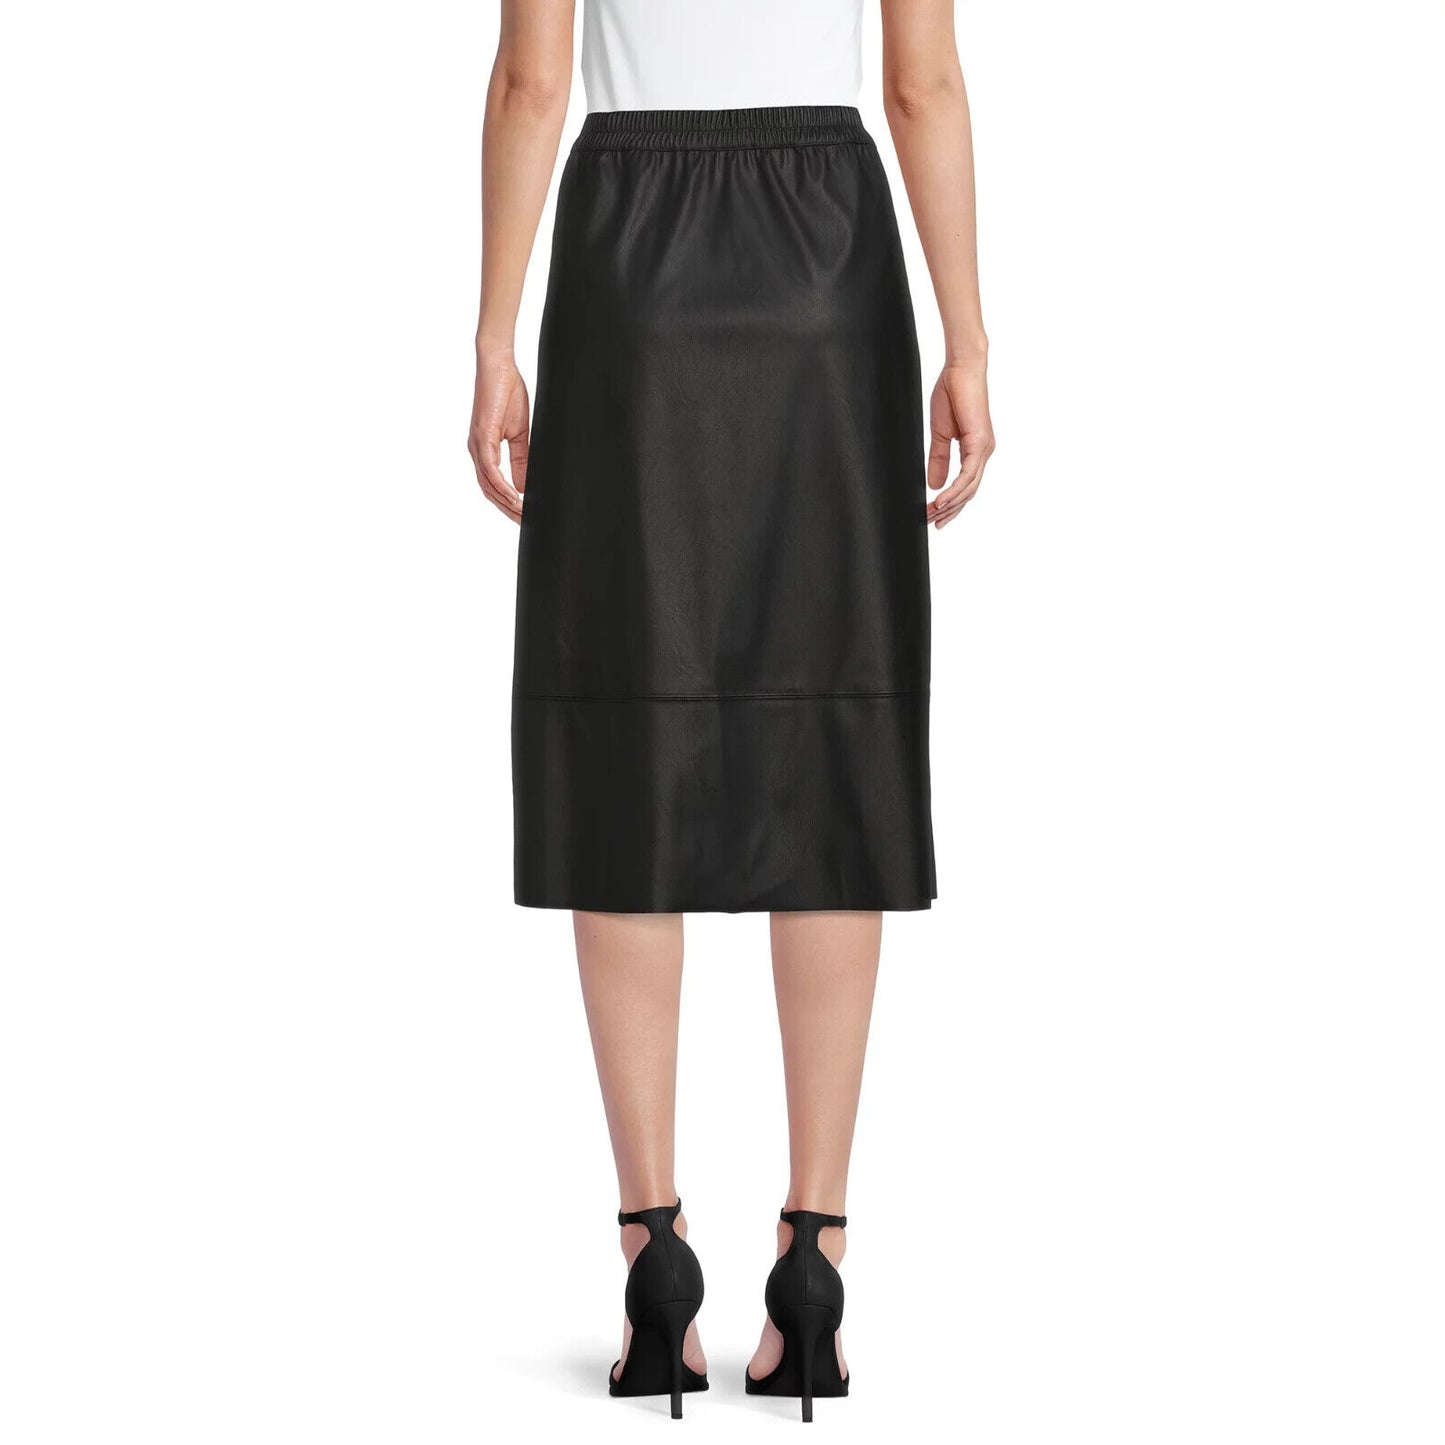 The Get Women's Faux Leather Midi Skirt M